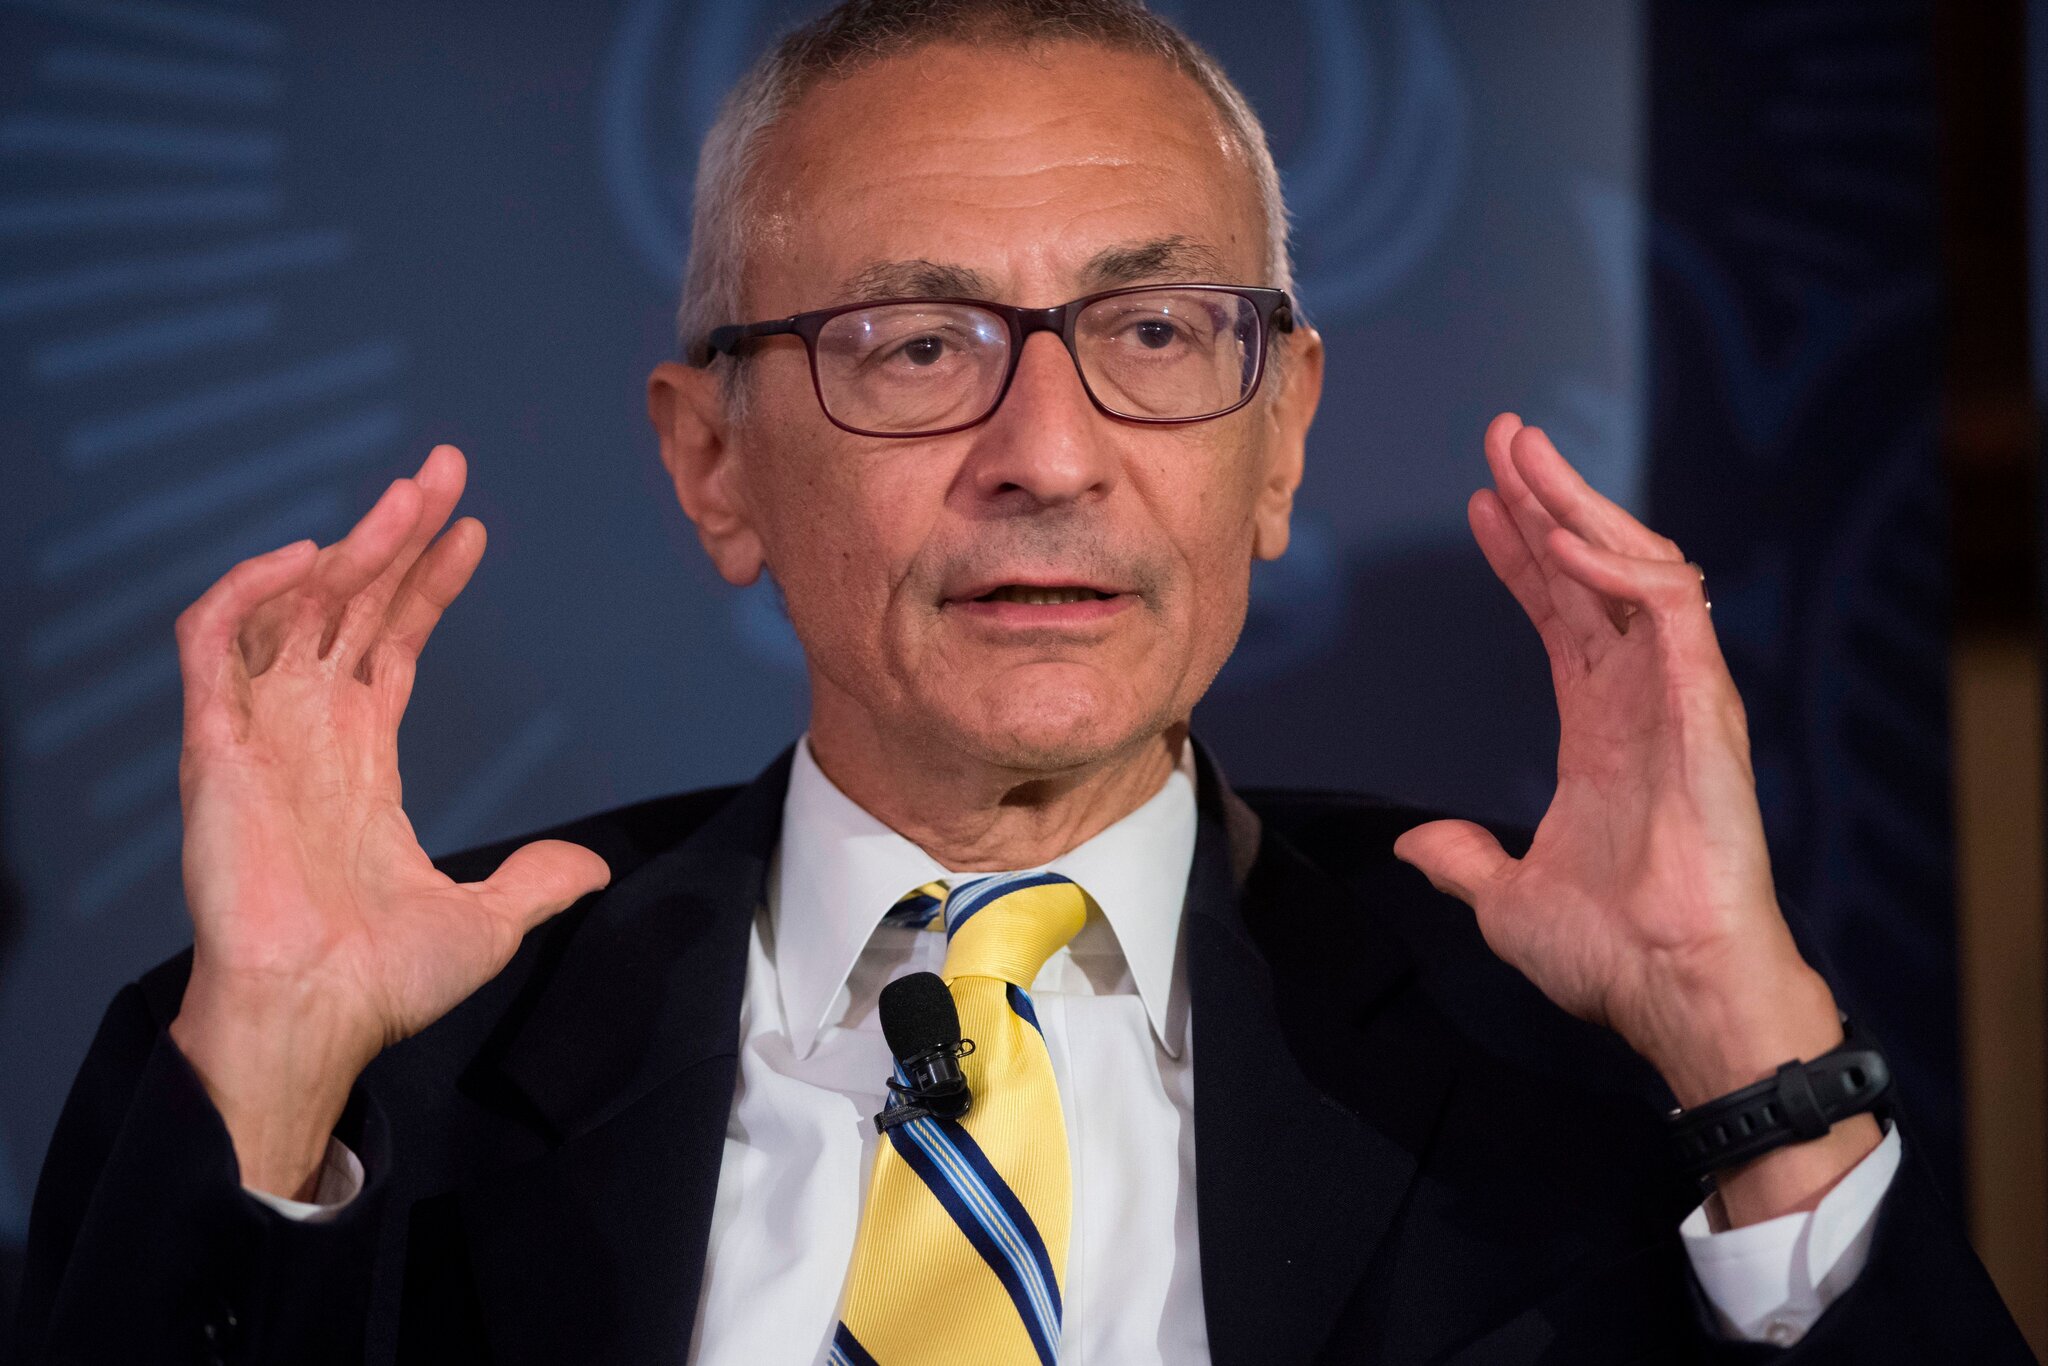 John Podesta was a top adviser to President Barack Obama, chief of staff to President Bill Clinton and campaign chairman for Hillary Clinton.Credit...Saul Loeb/Agence France-Presse — Getty Images